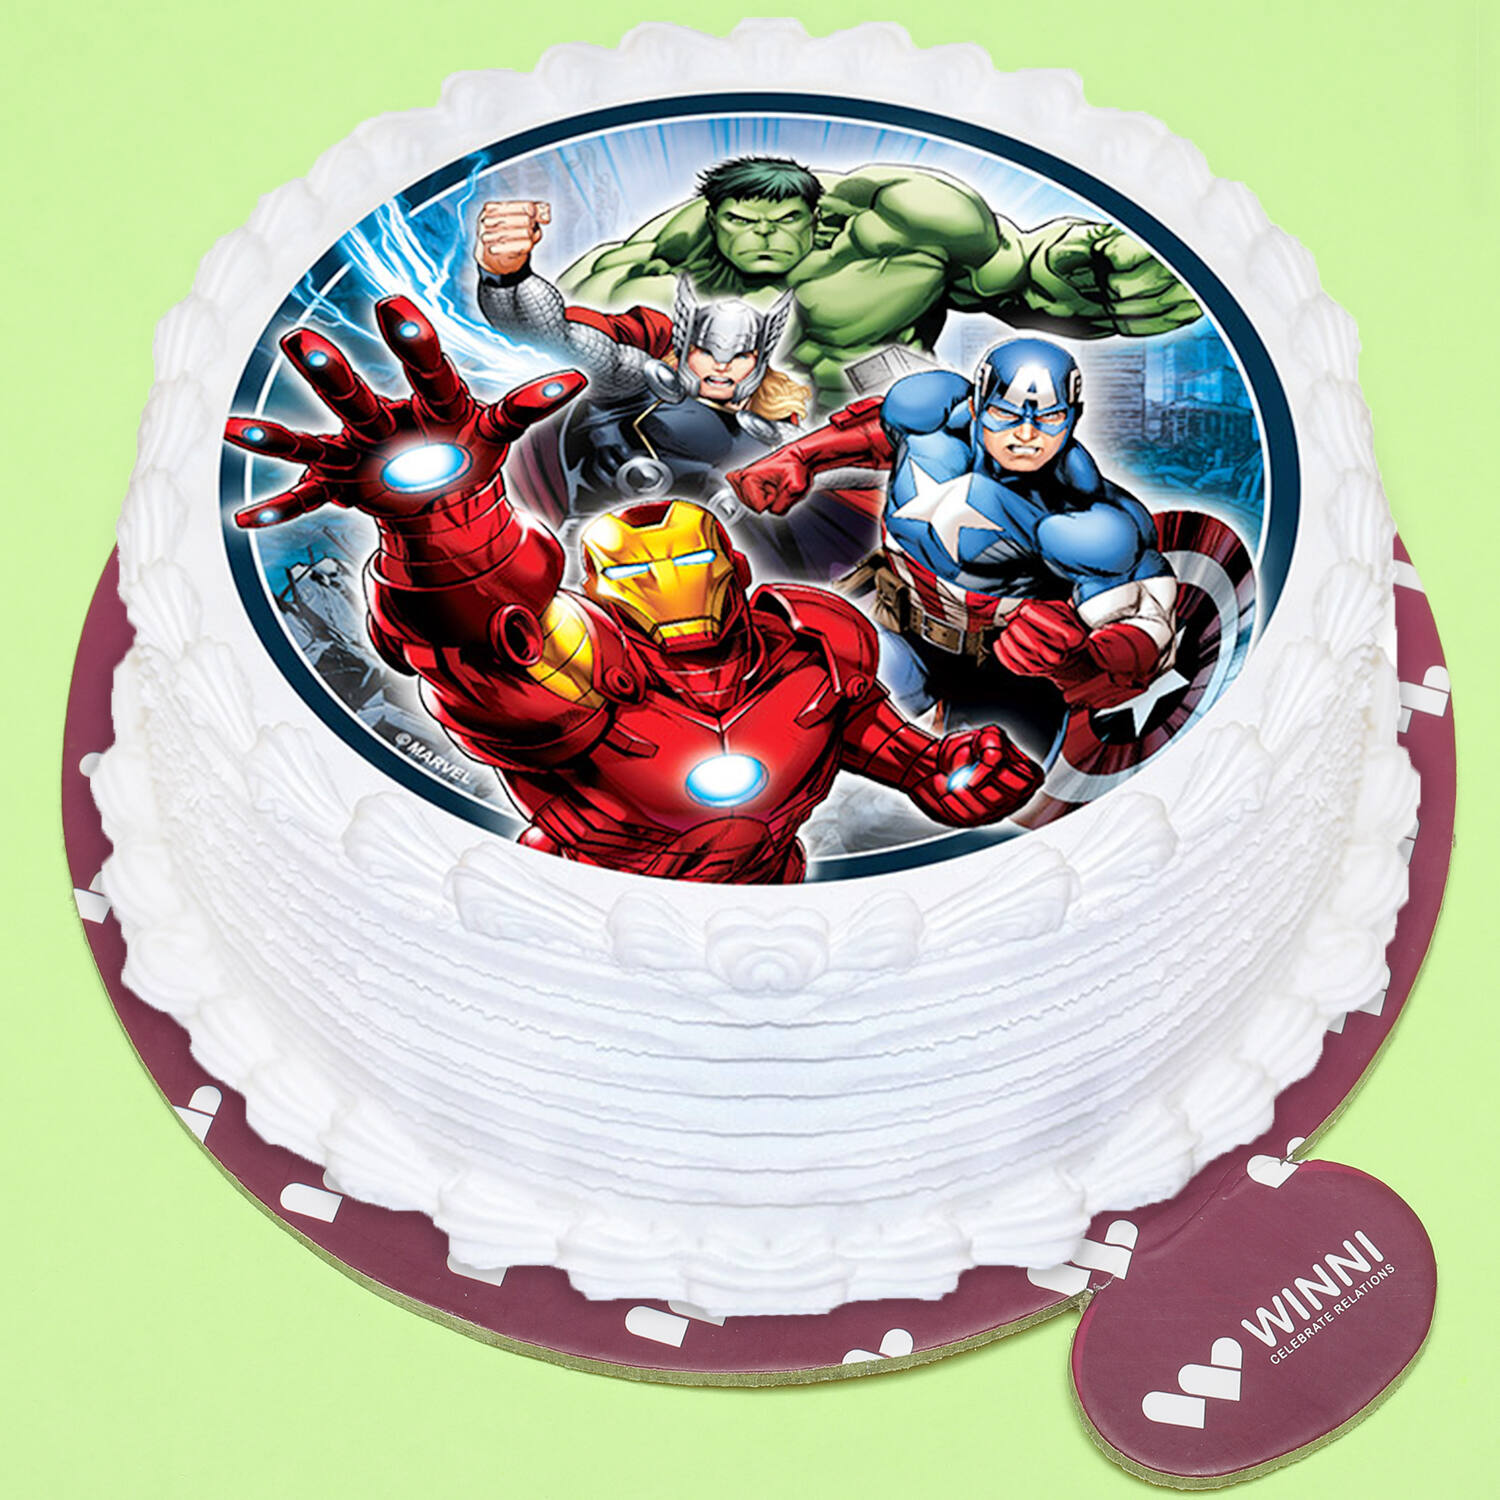 Baskin Robbins Japan assembles an awesome Marvel Avengers ice cream cake to  save the day - Japan Today